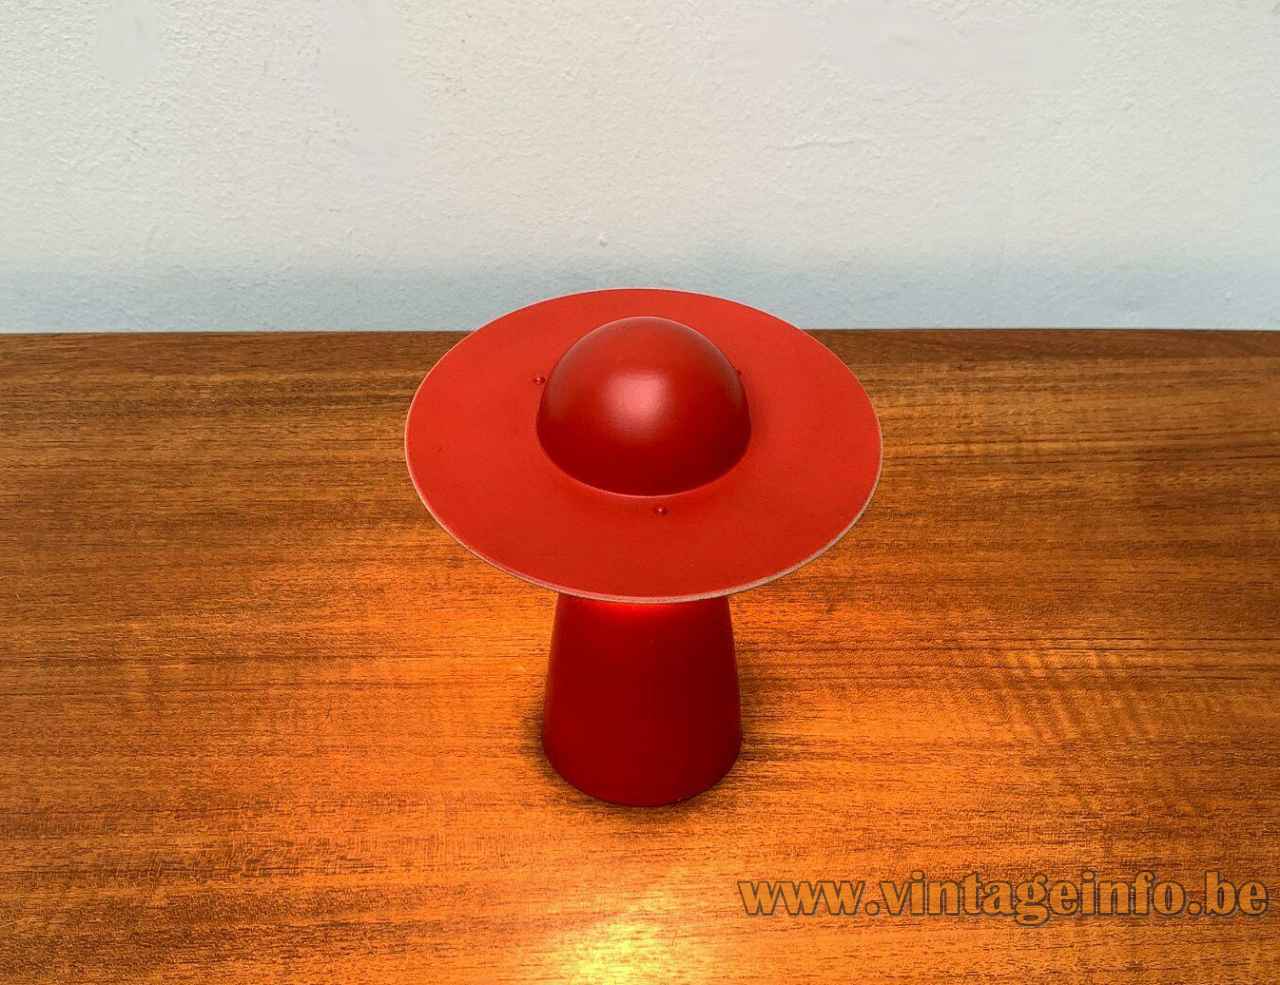 Temde hat table lamp red conical metal base bowler lampshade 1950s 1960s Germany Switzerland top view